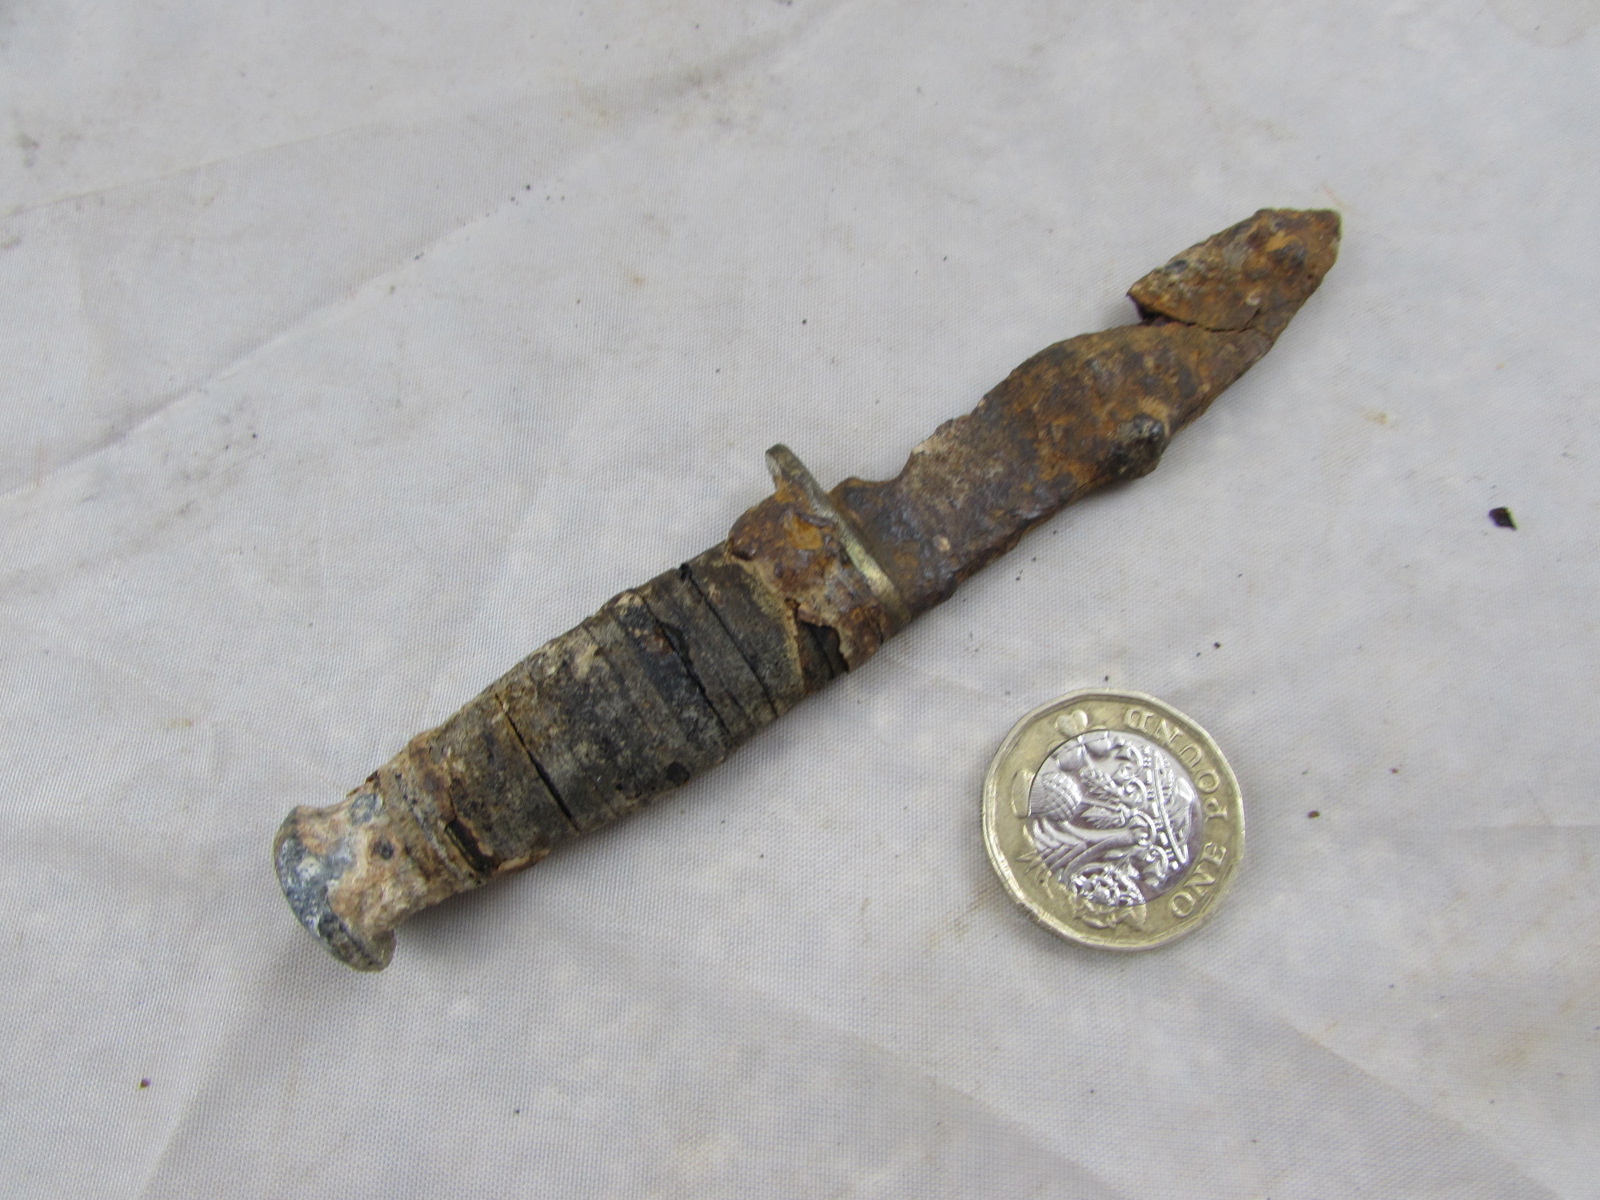 WW11 British Knife recovered from Caen France